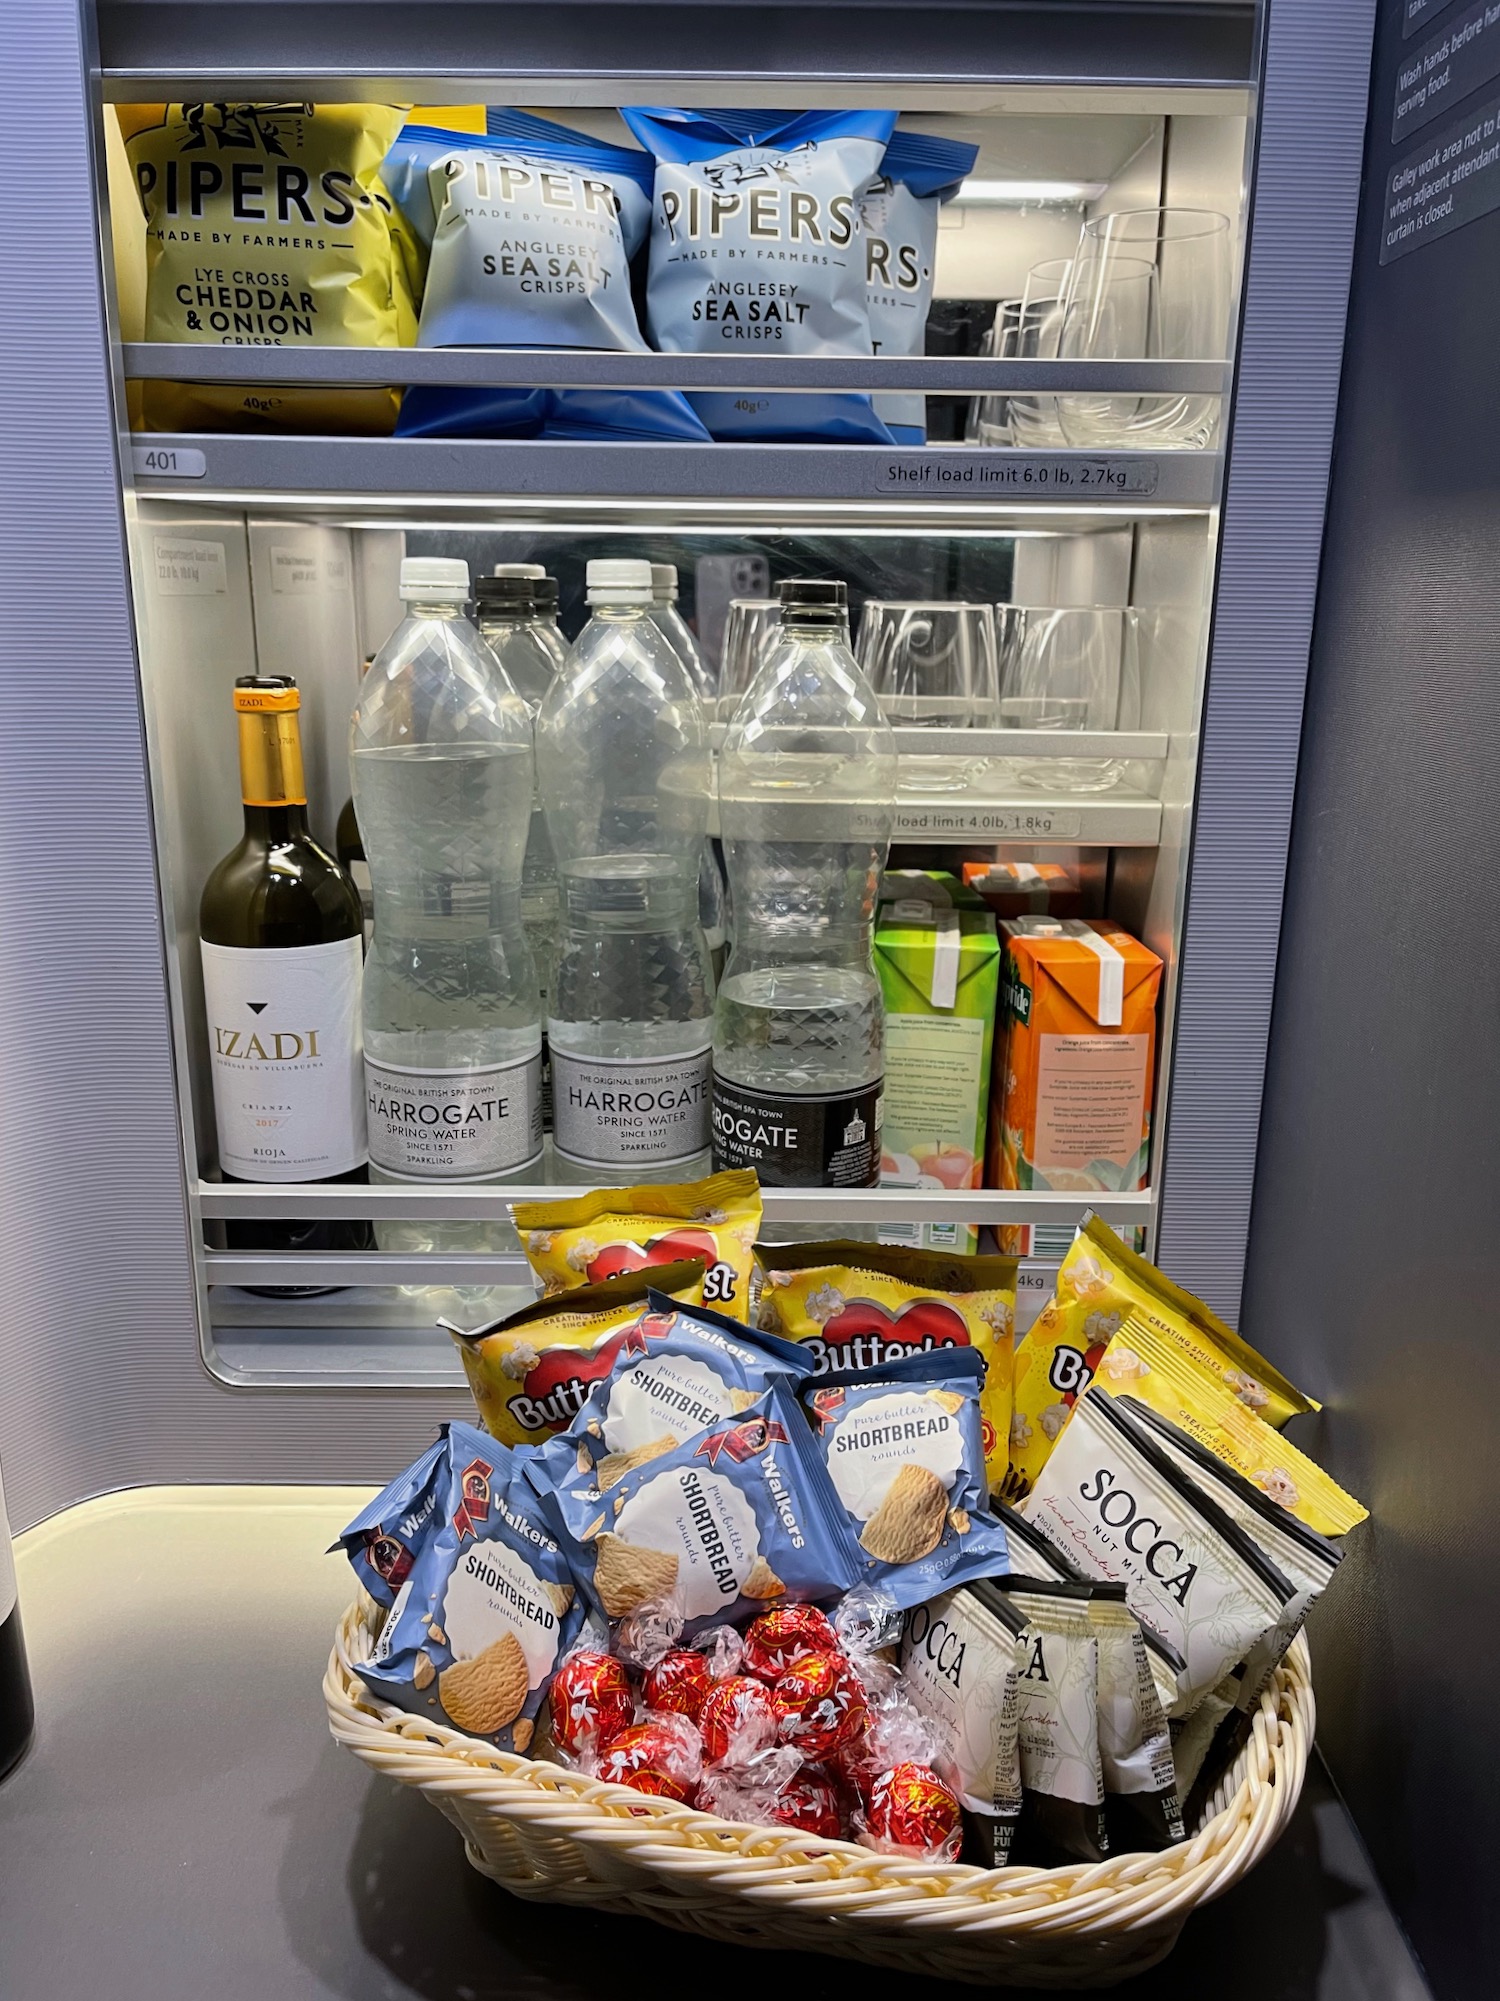 a basket of snacks and drinks in a refrigerator